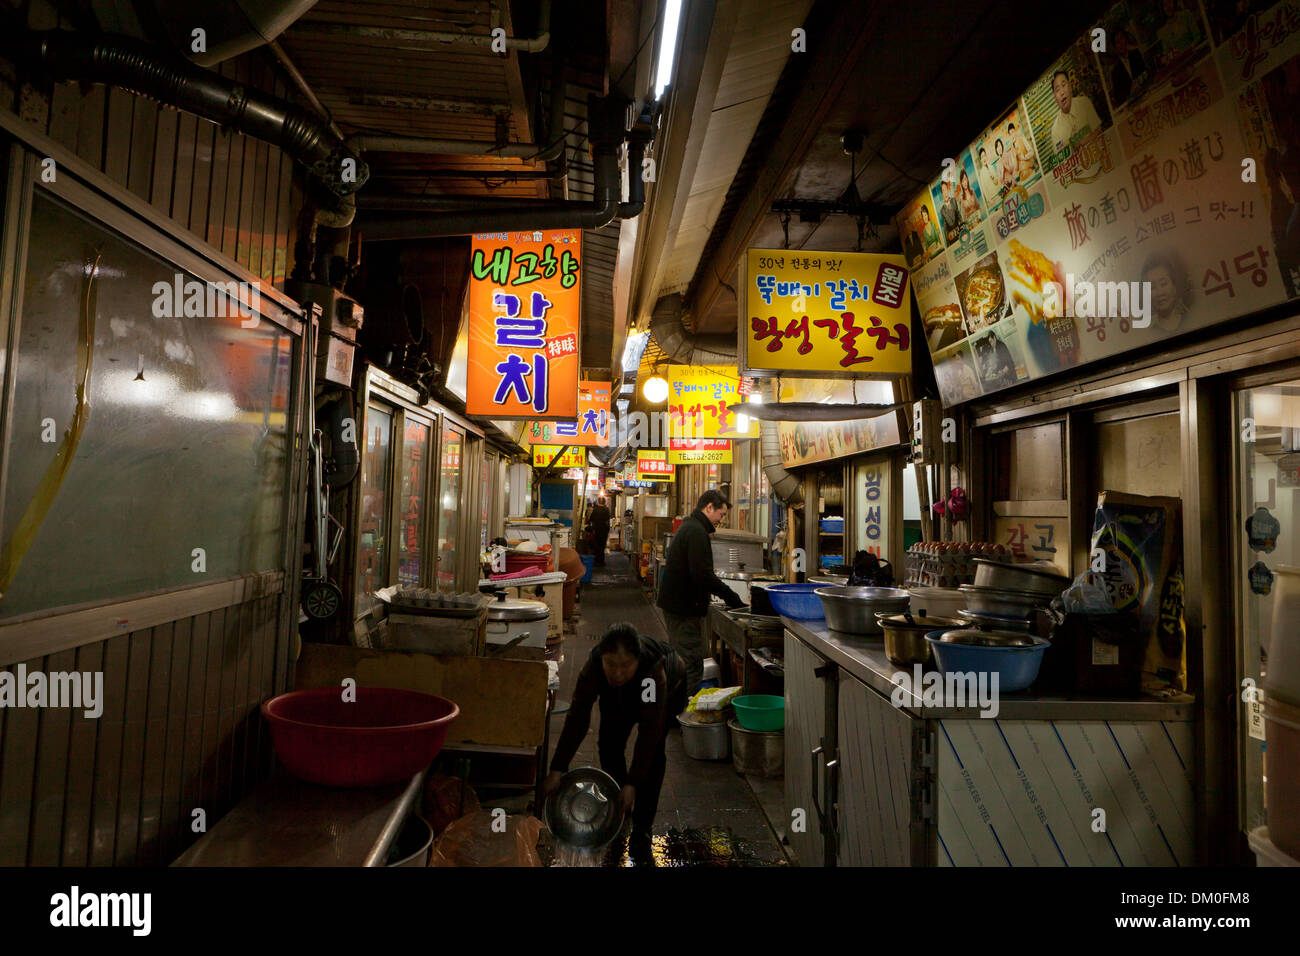 Alley of Galchi (beltfish) specialty restaurants in shijang (traditional market) - Seoul, South Korea Stock Photo